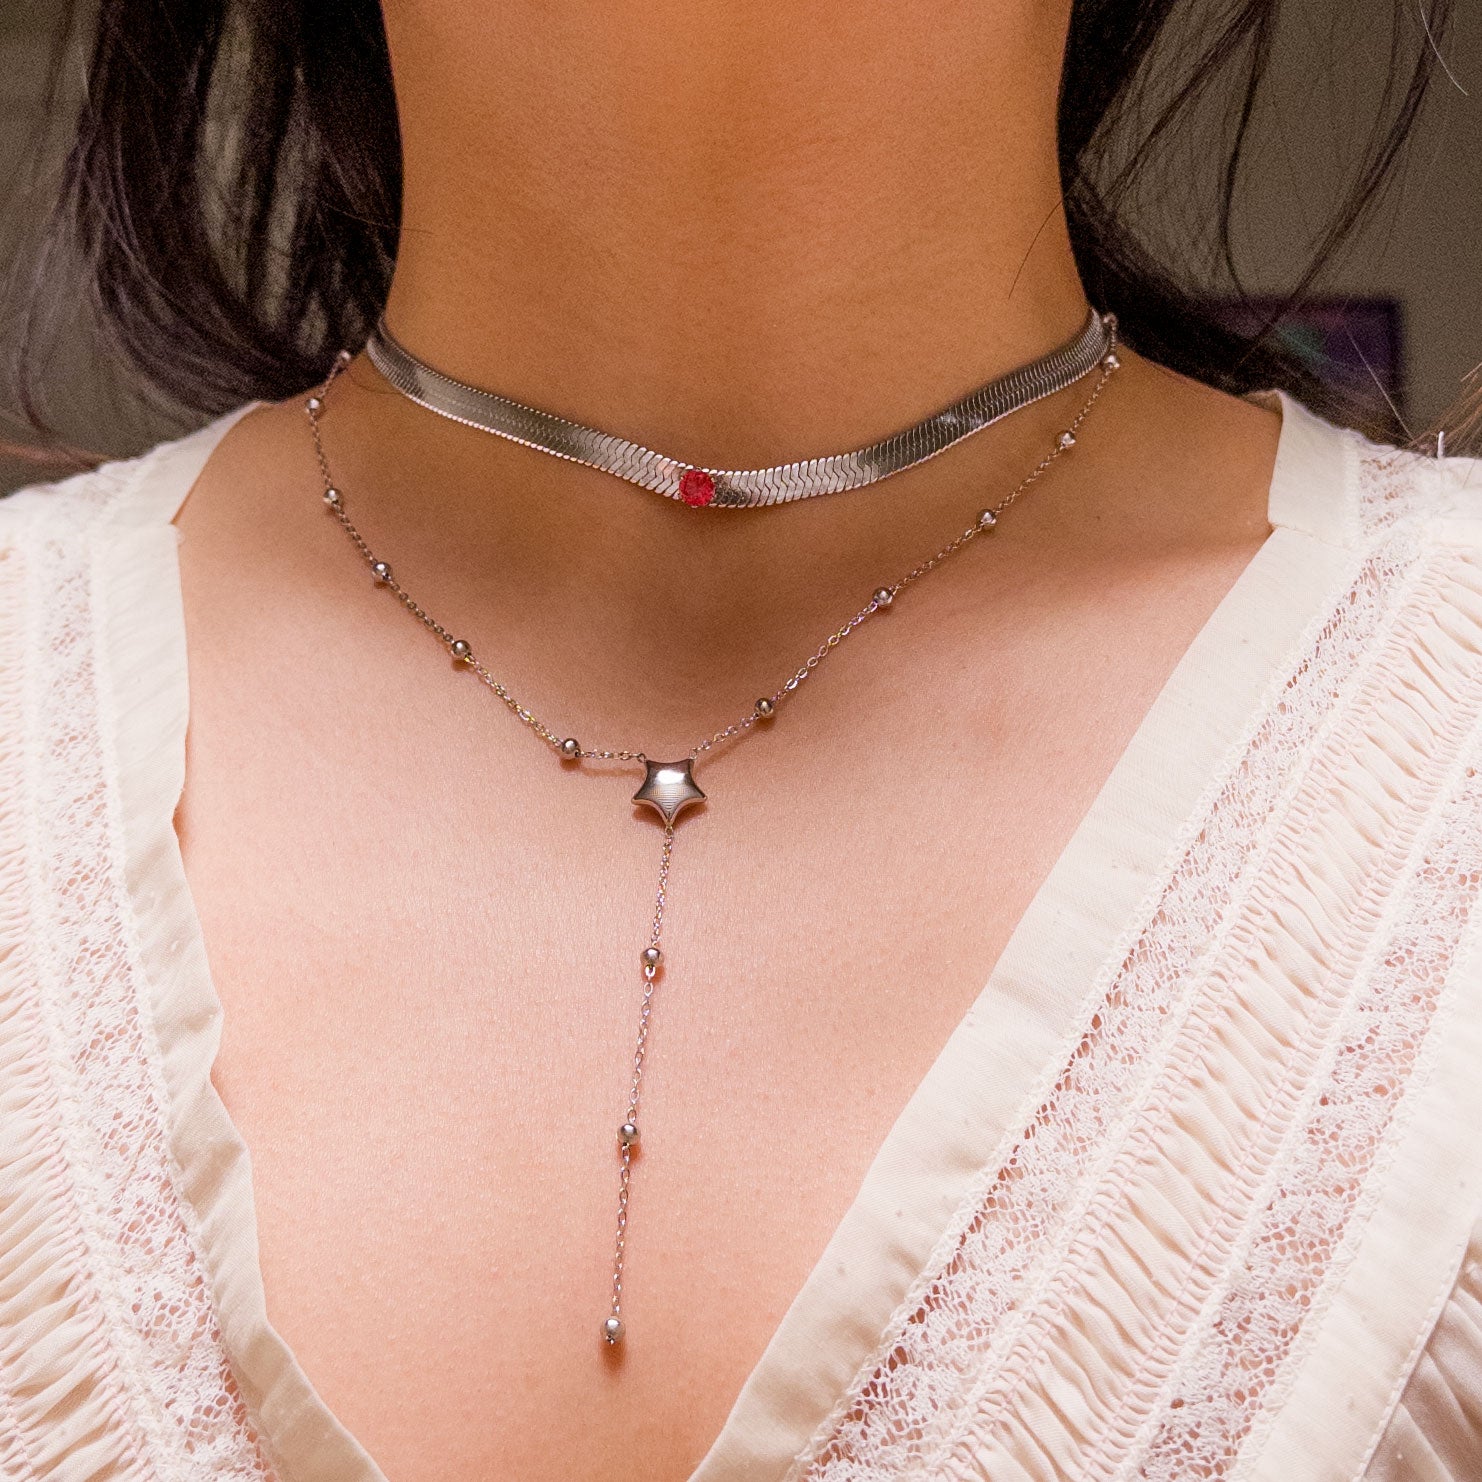 Stainless steel silver colored snake chain choker/necklace featuring a red ruby cubic zirconia gem in the center. Can be dress up or down. Perfect for layering and everyday wear. 